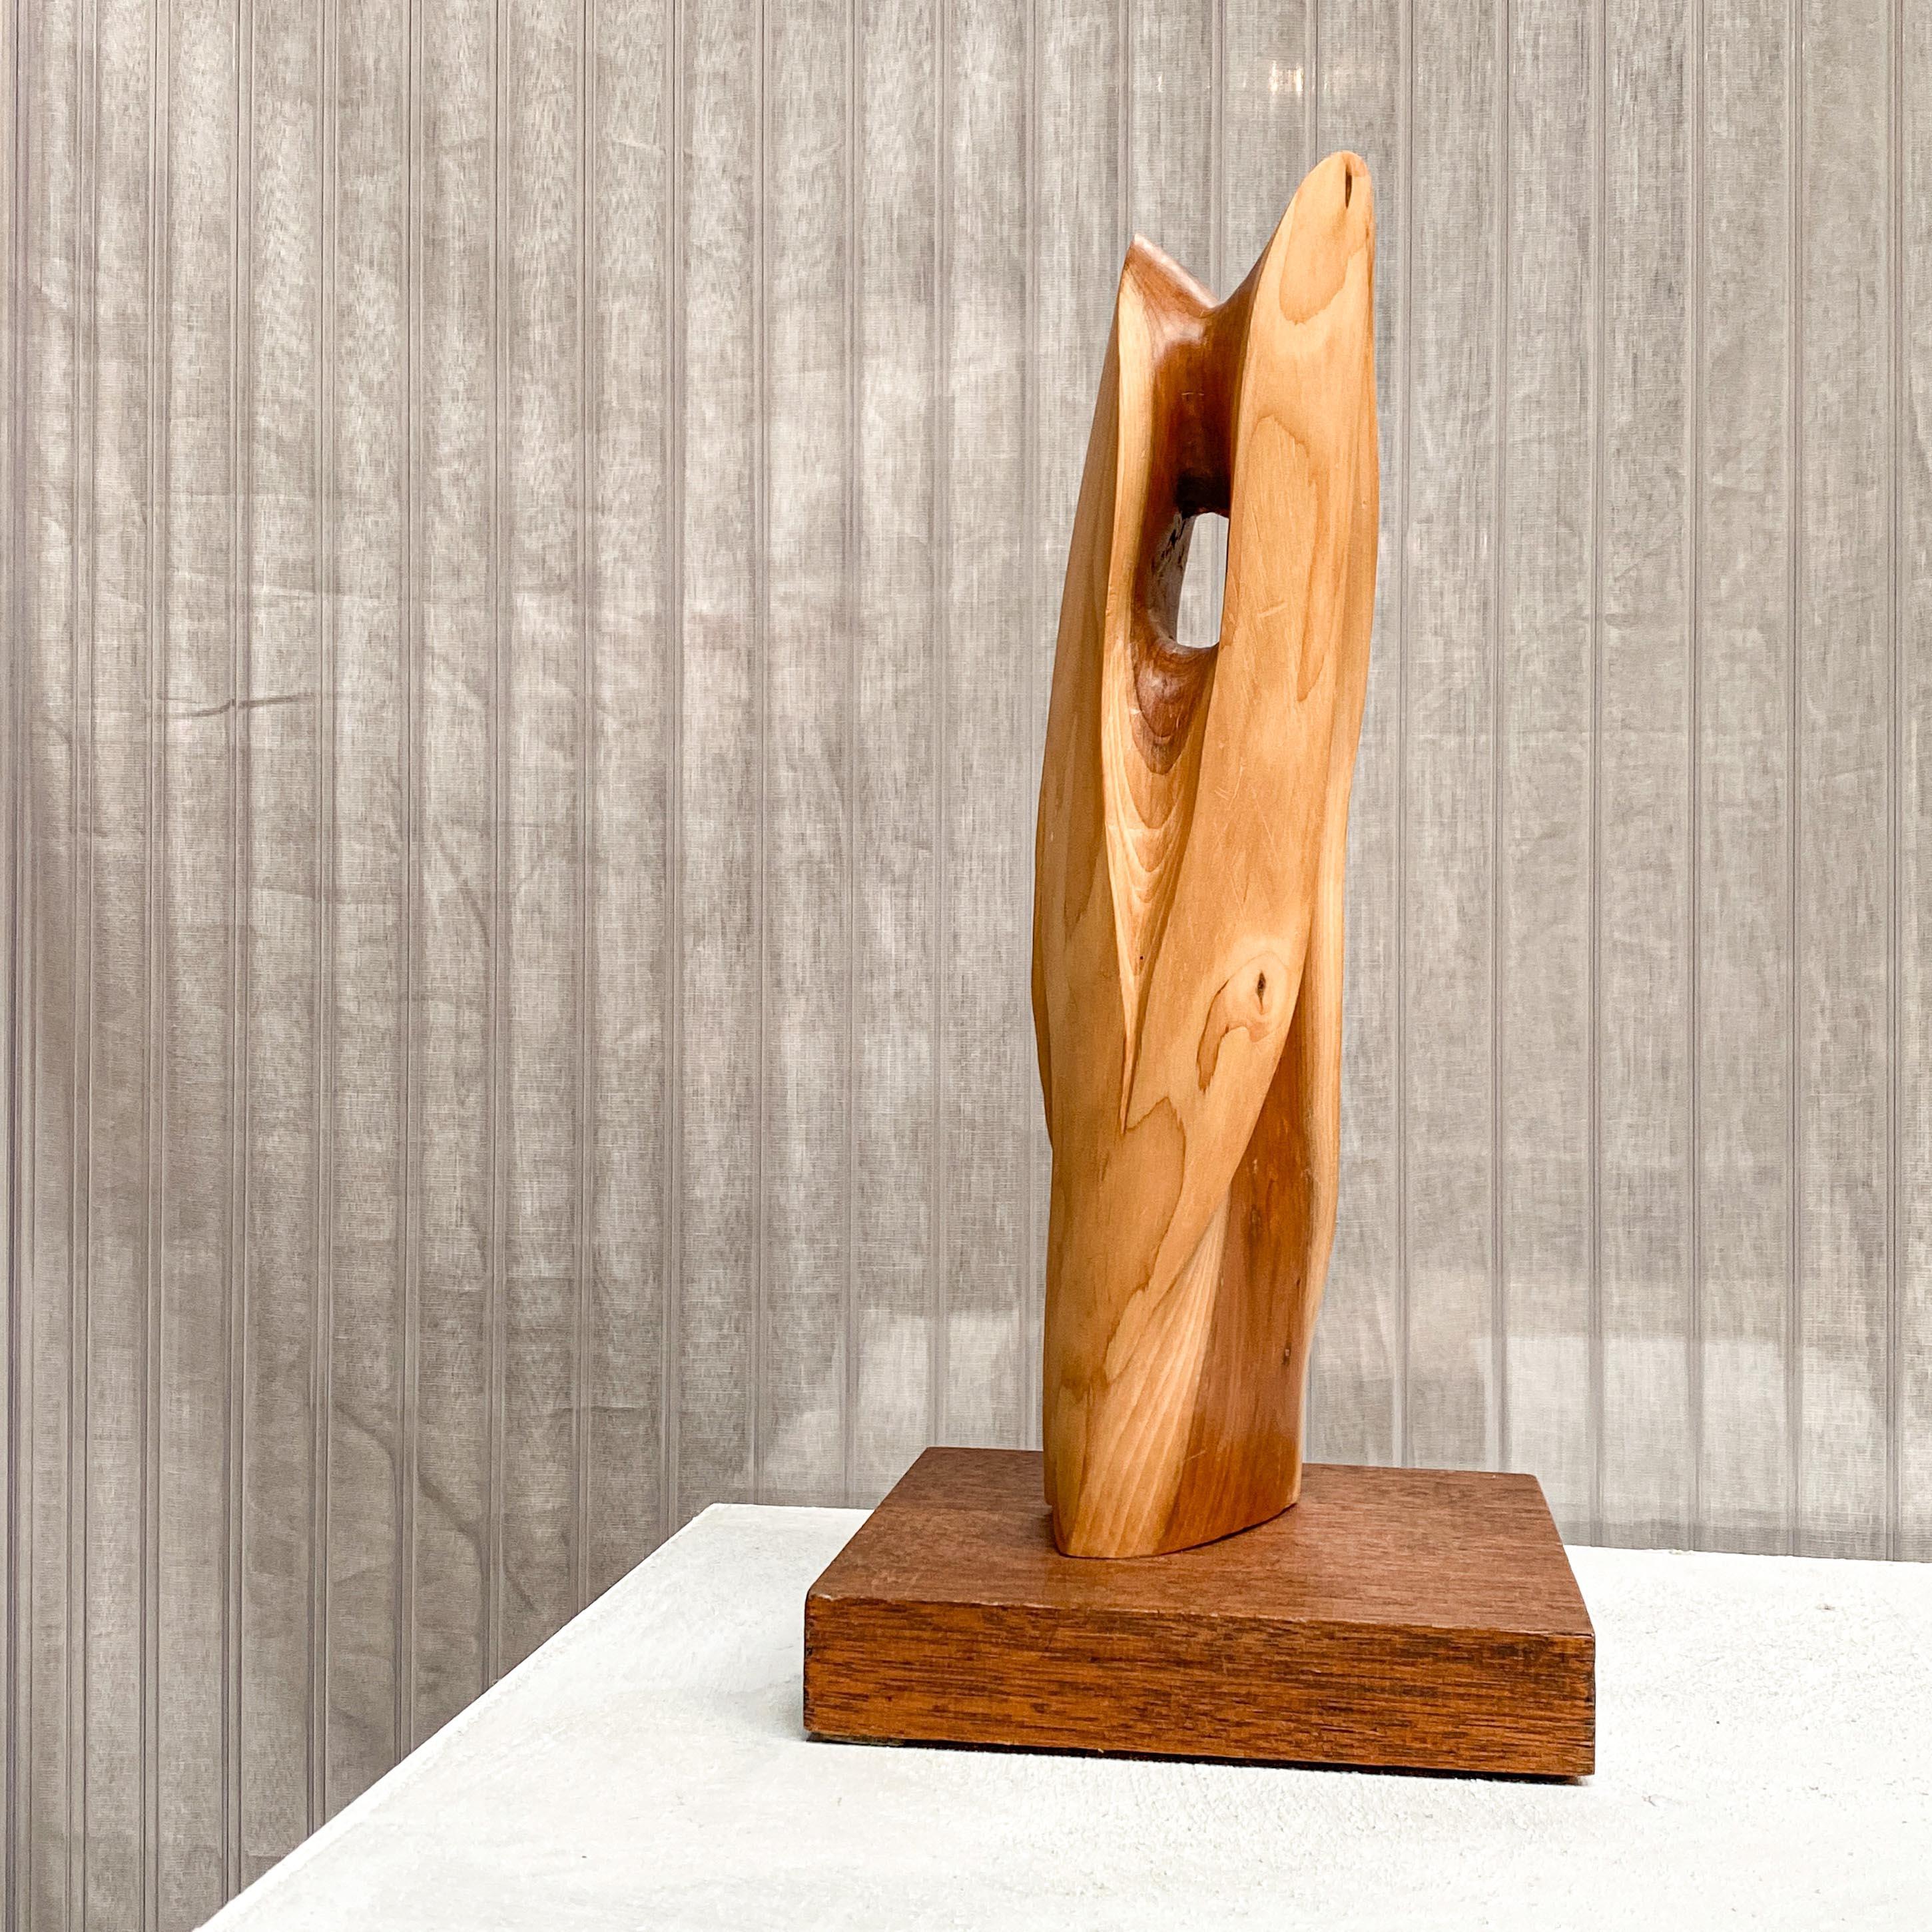 Modernist Wooden Sculpture in Abstract Intricate TOTEM Shape on a Wooden Base For Sale 3